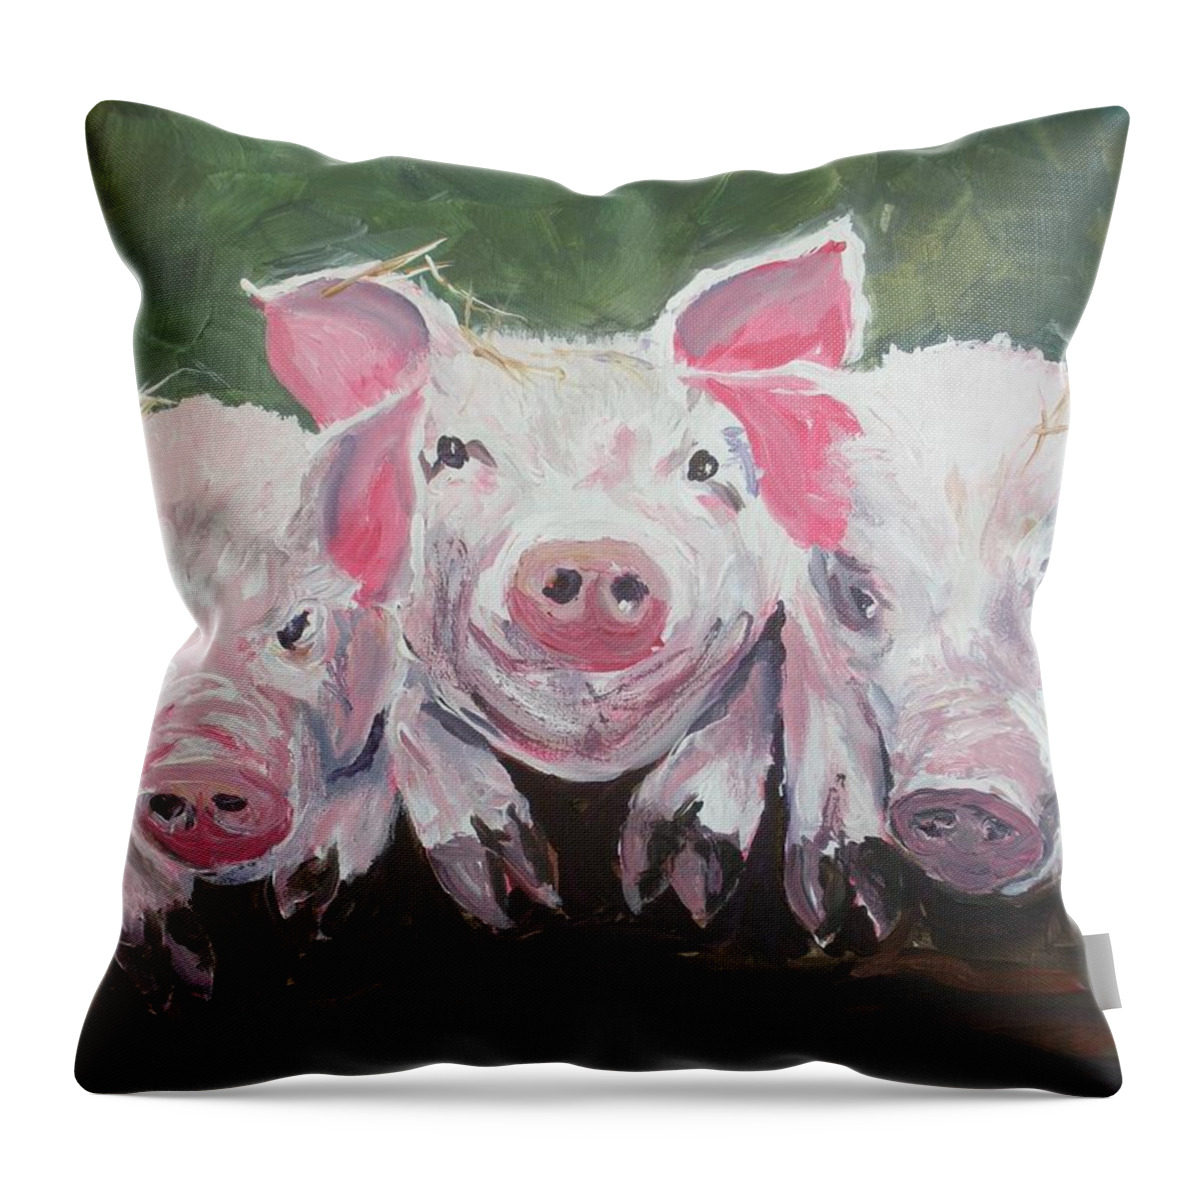 Pigs Throw Pillow featuring the painting Three Little Pigs by Lee Stockwell